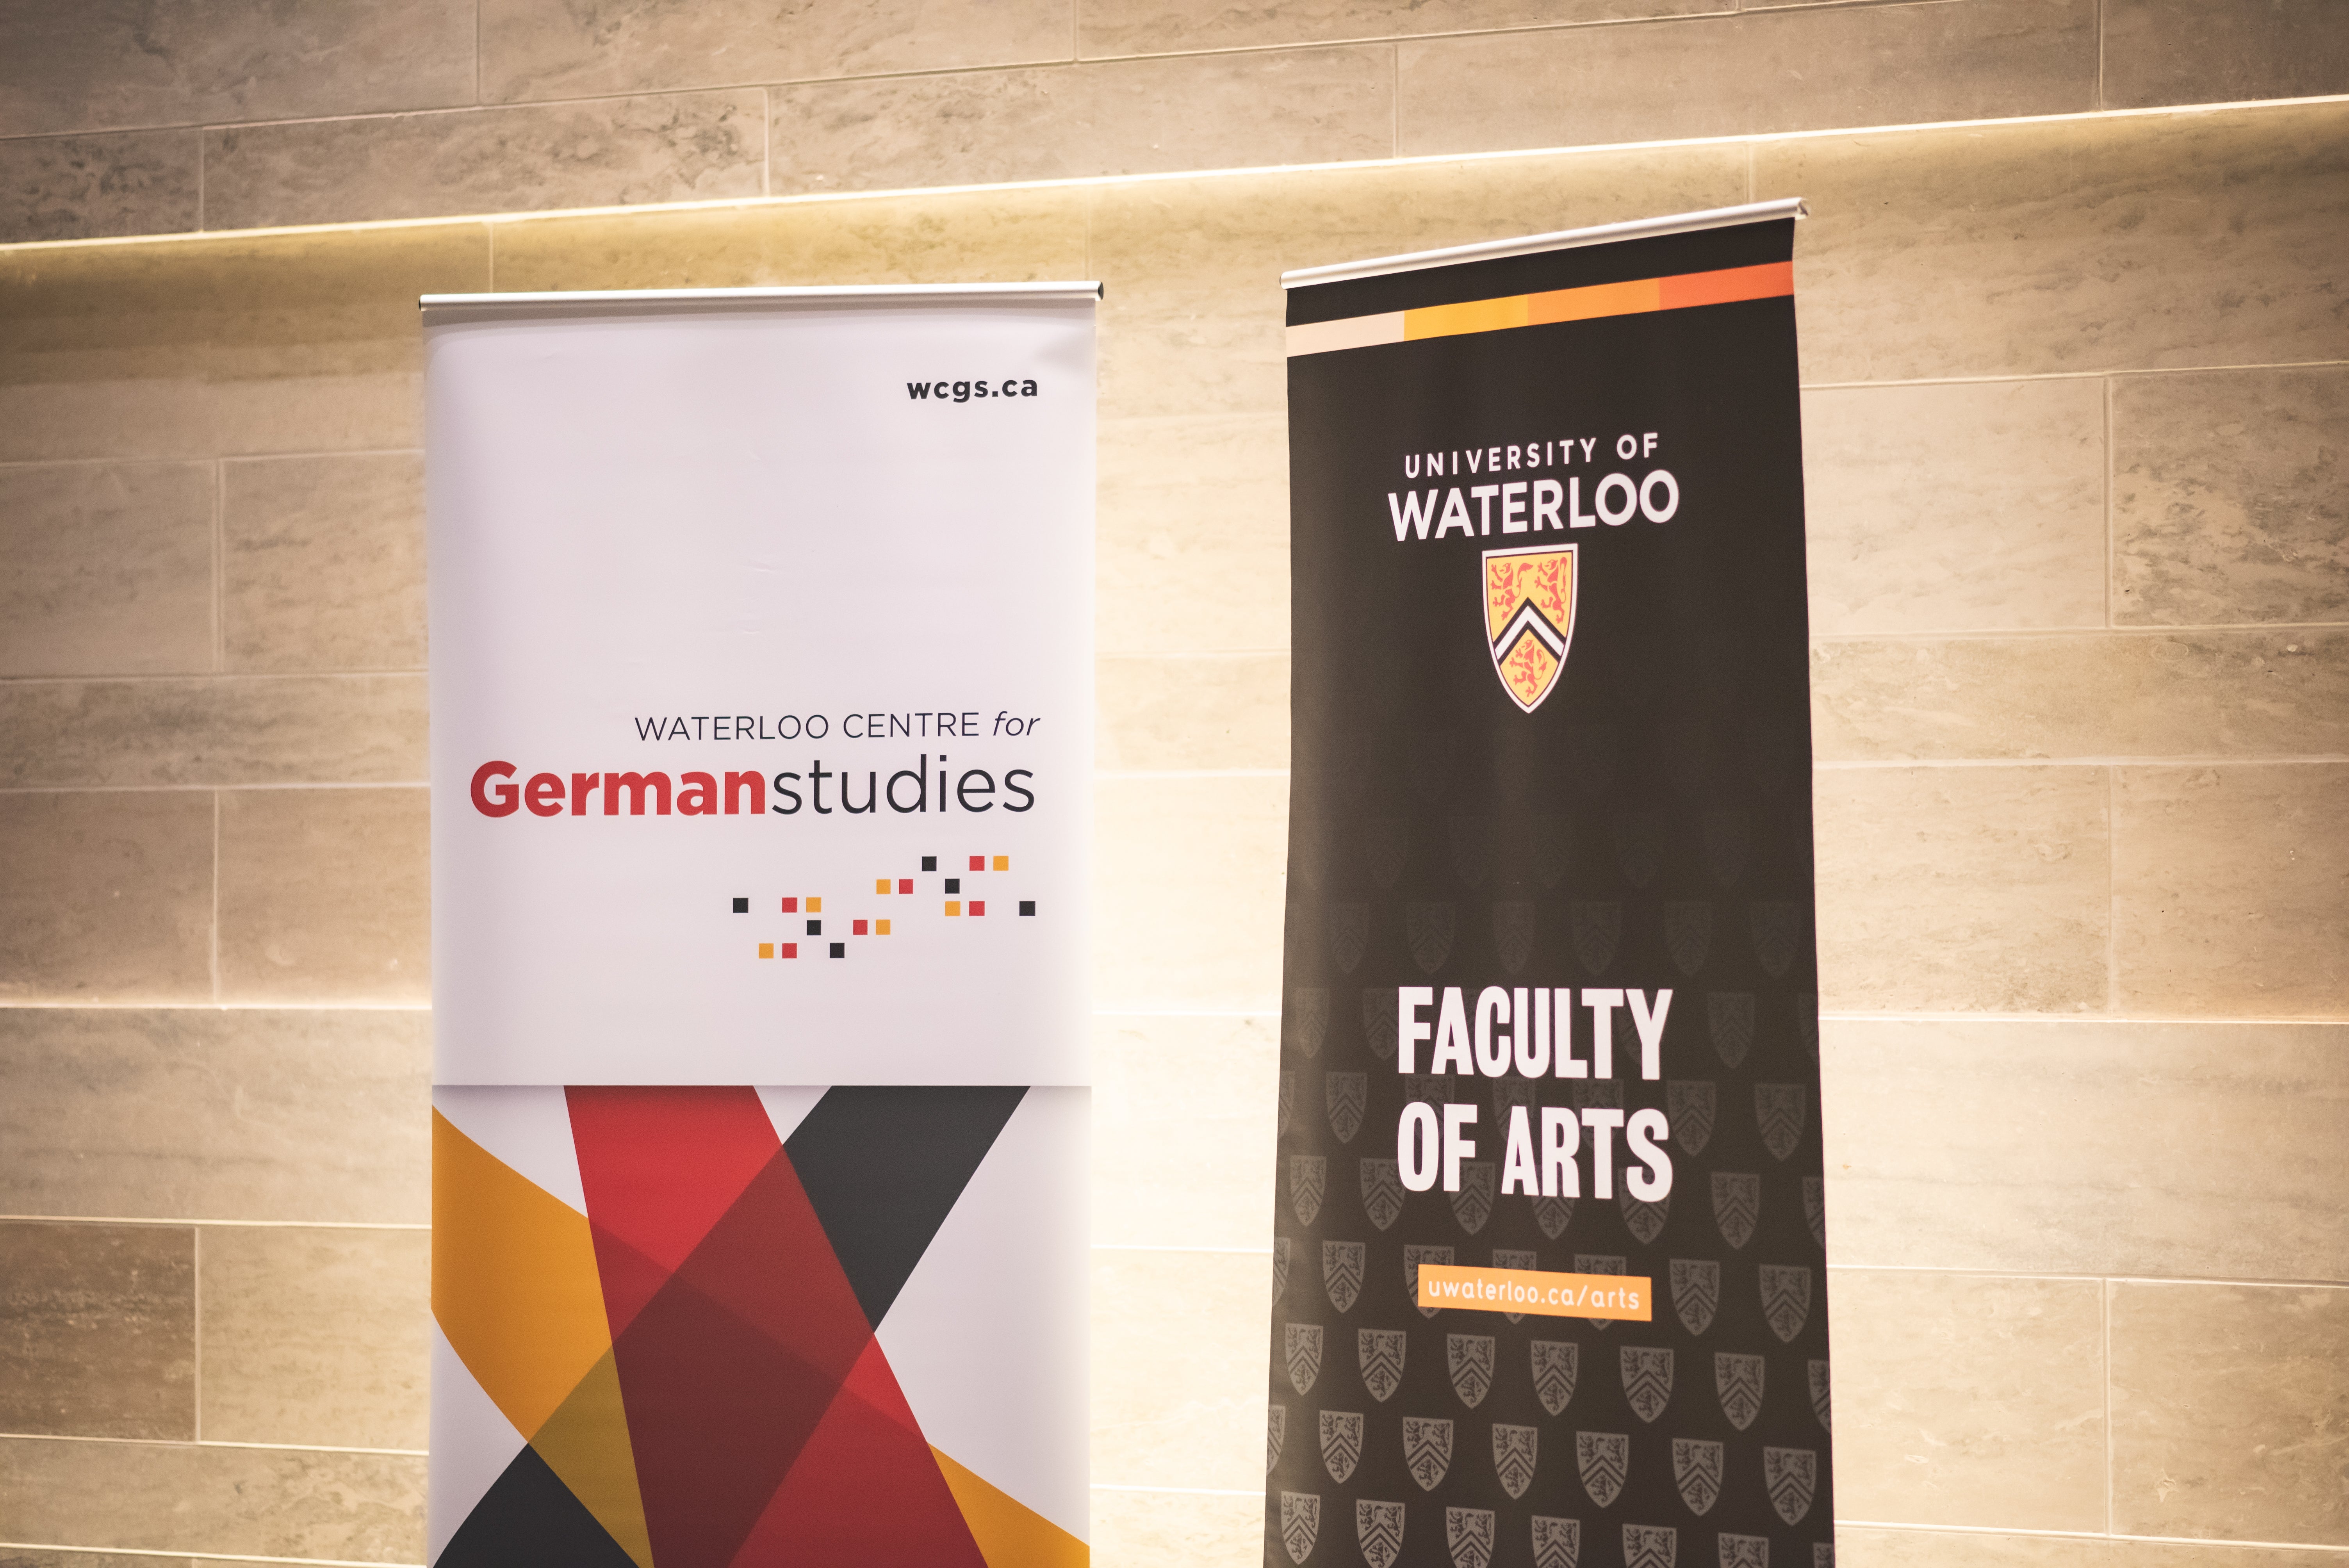 Banners for WCGS and UWaterloo